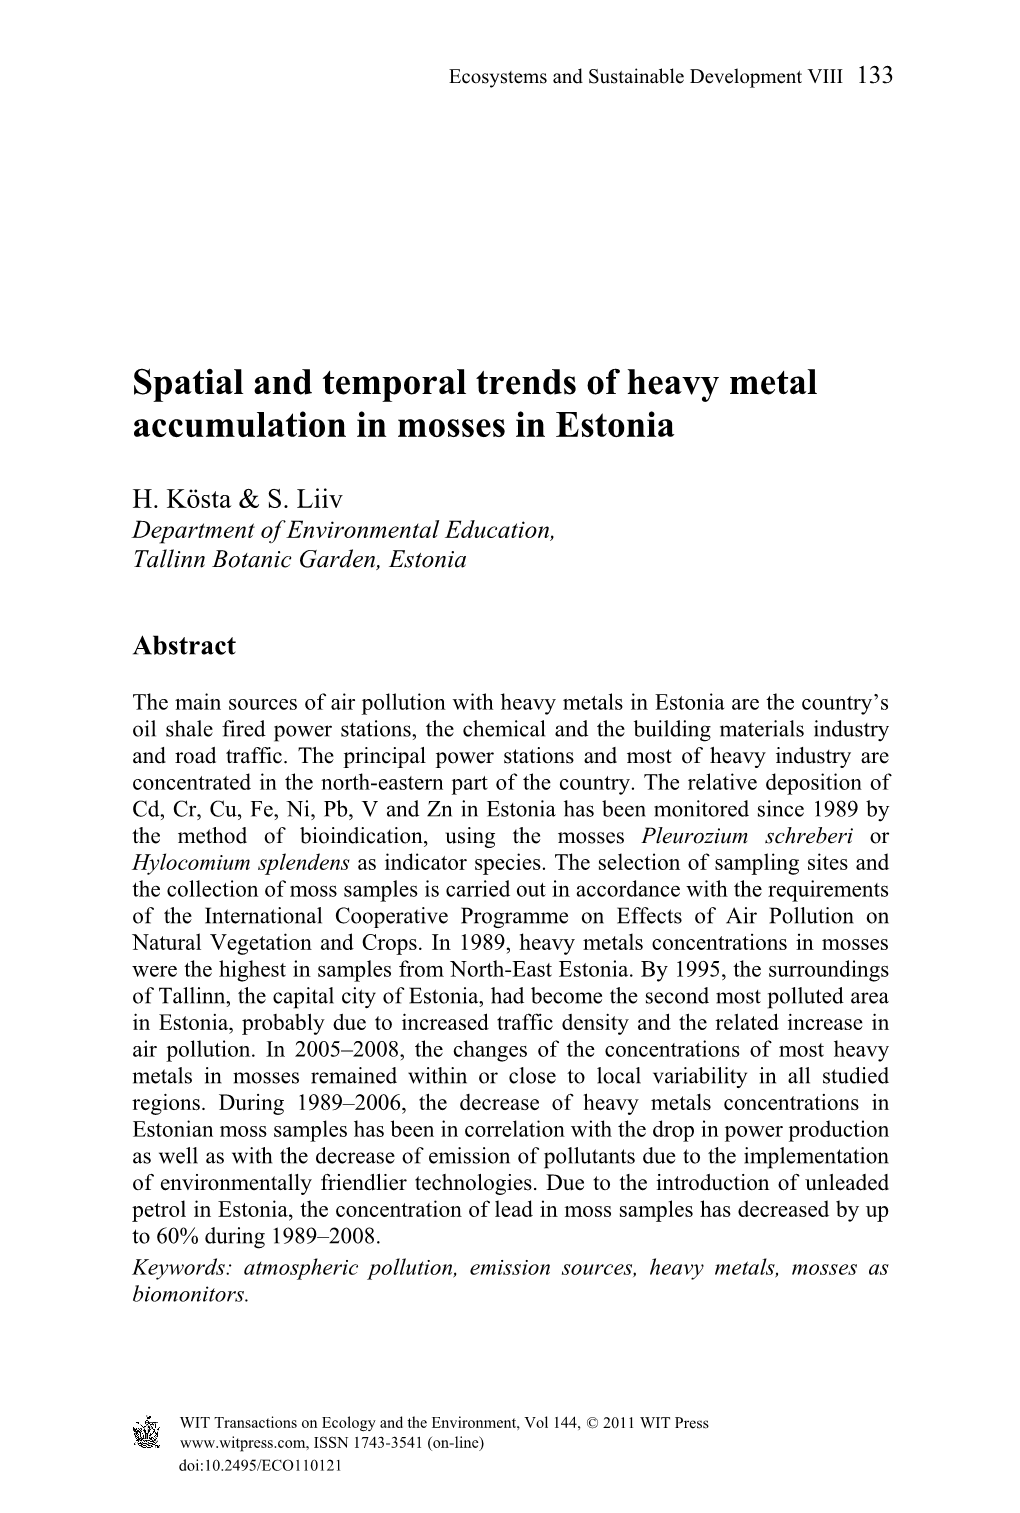 Spatial and Temporal Trends of Heavy Metal Accumulation in Mosses in Estonia